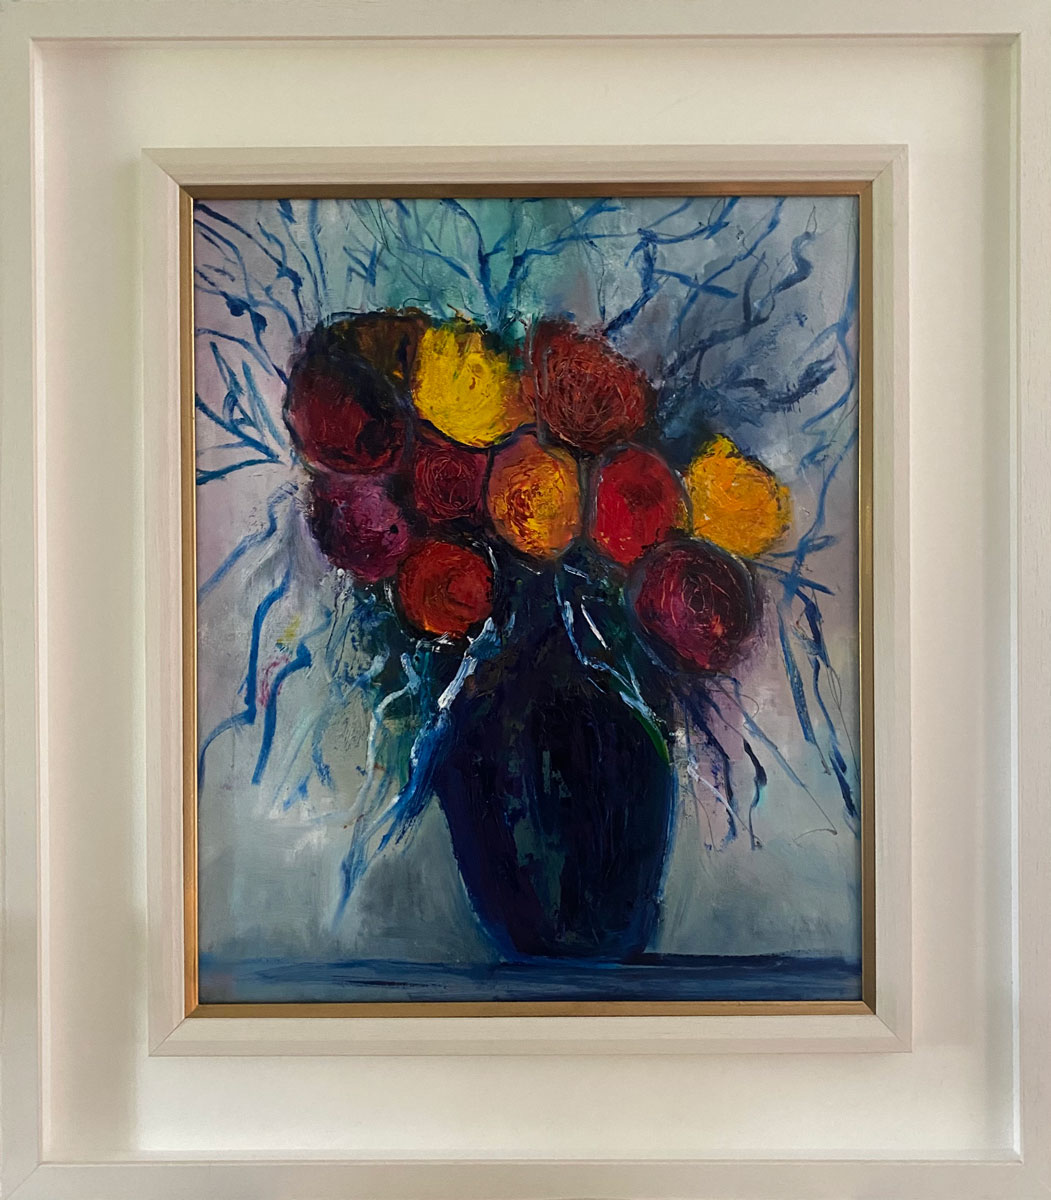 Flowers to Brighten Your Day - Original floral oil painting